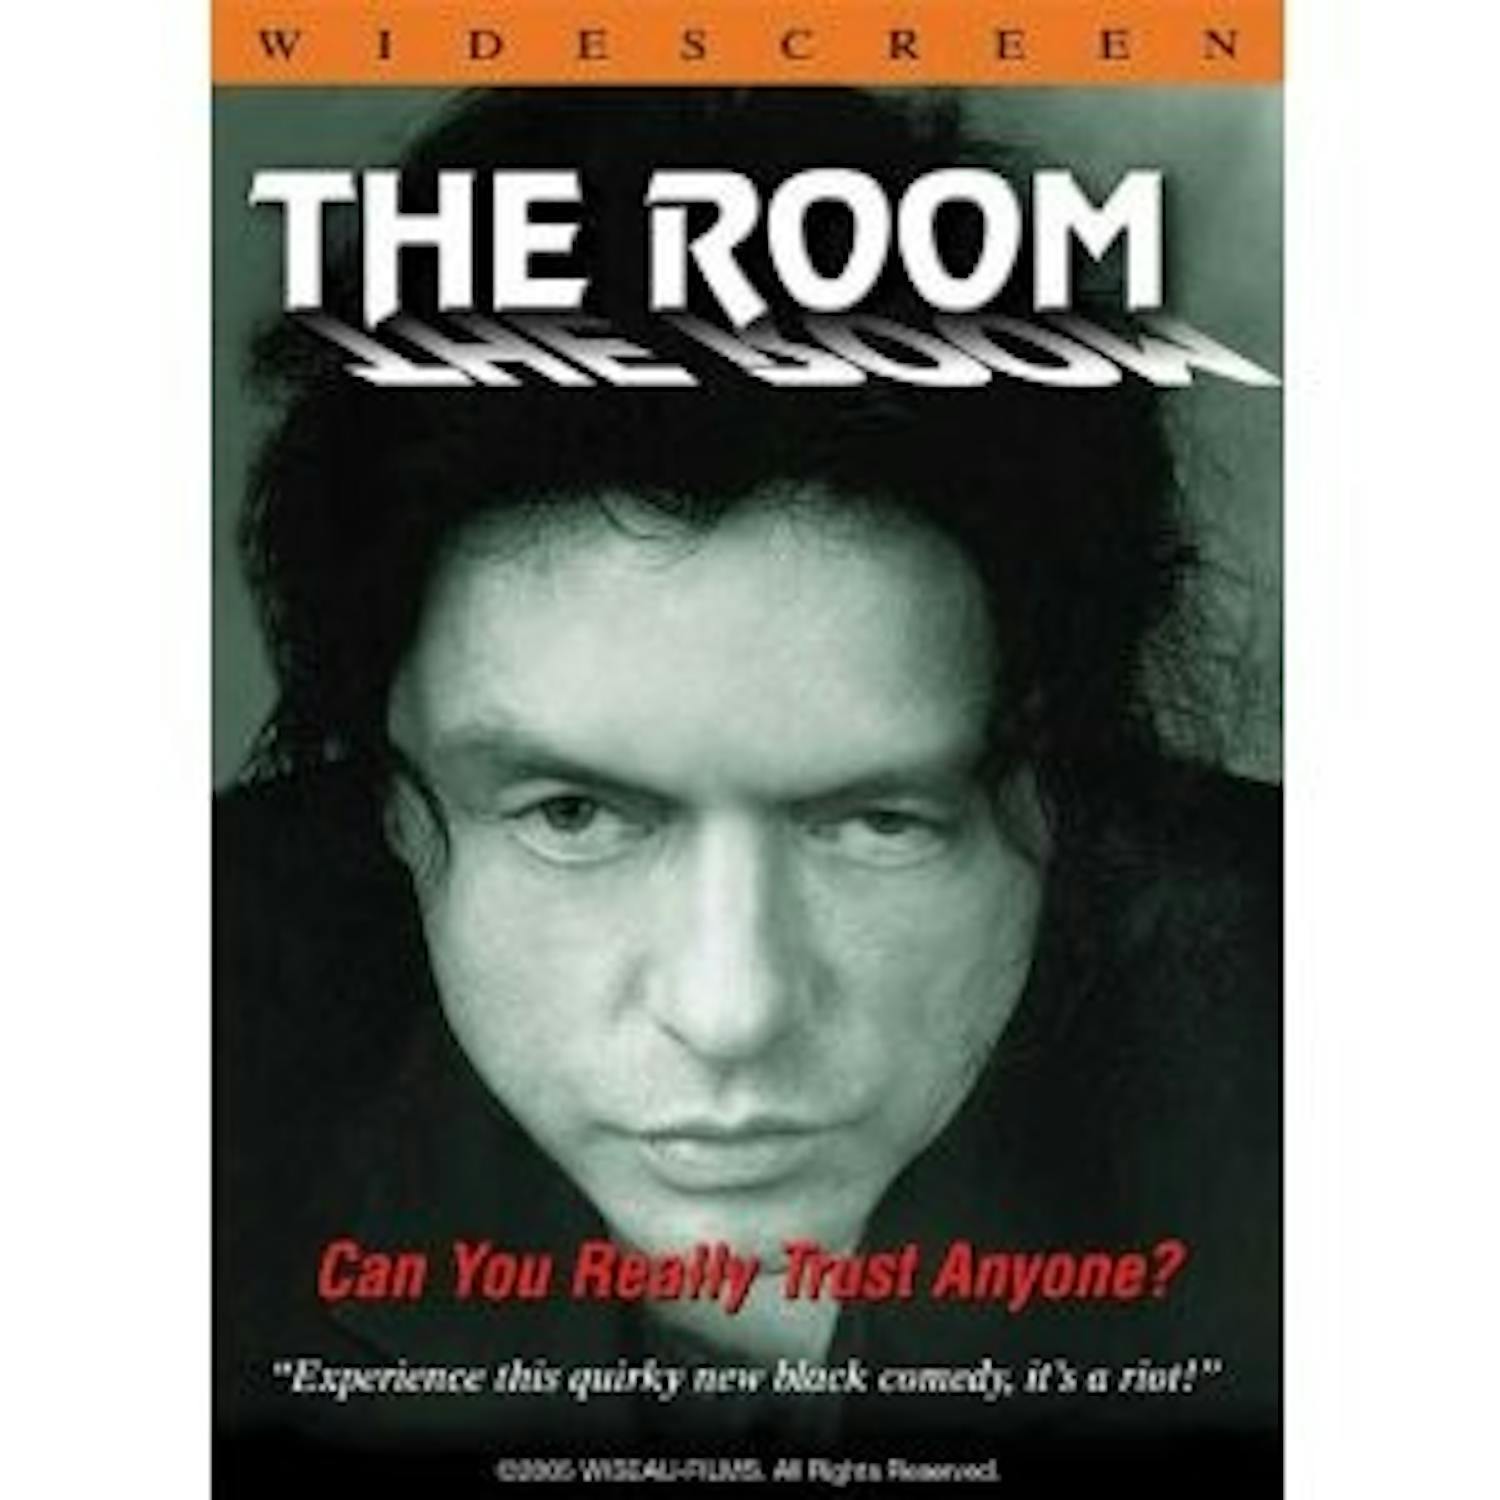 	‘The Room’ will play this Saturday at 11:55 p.m. at Ann Arbor’s State Theater. Tickets are $7.